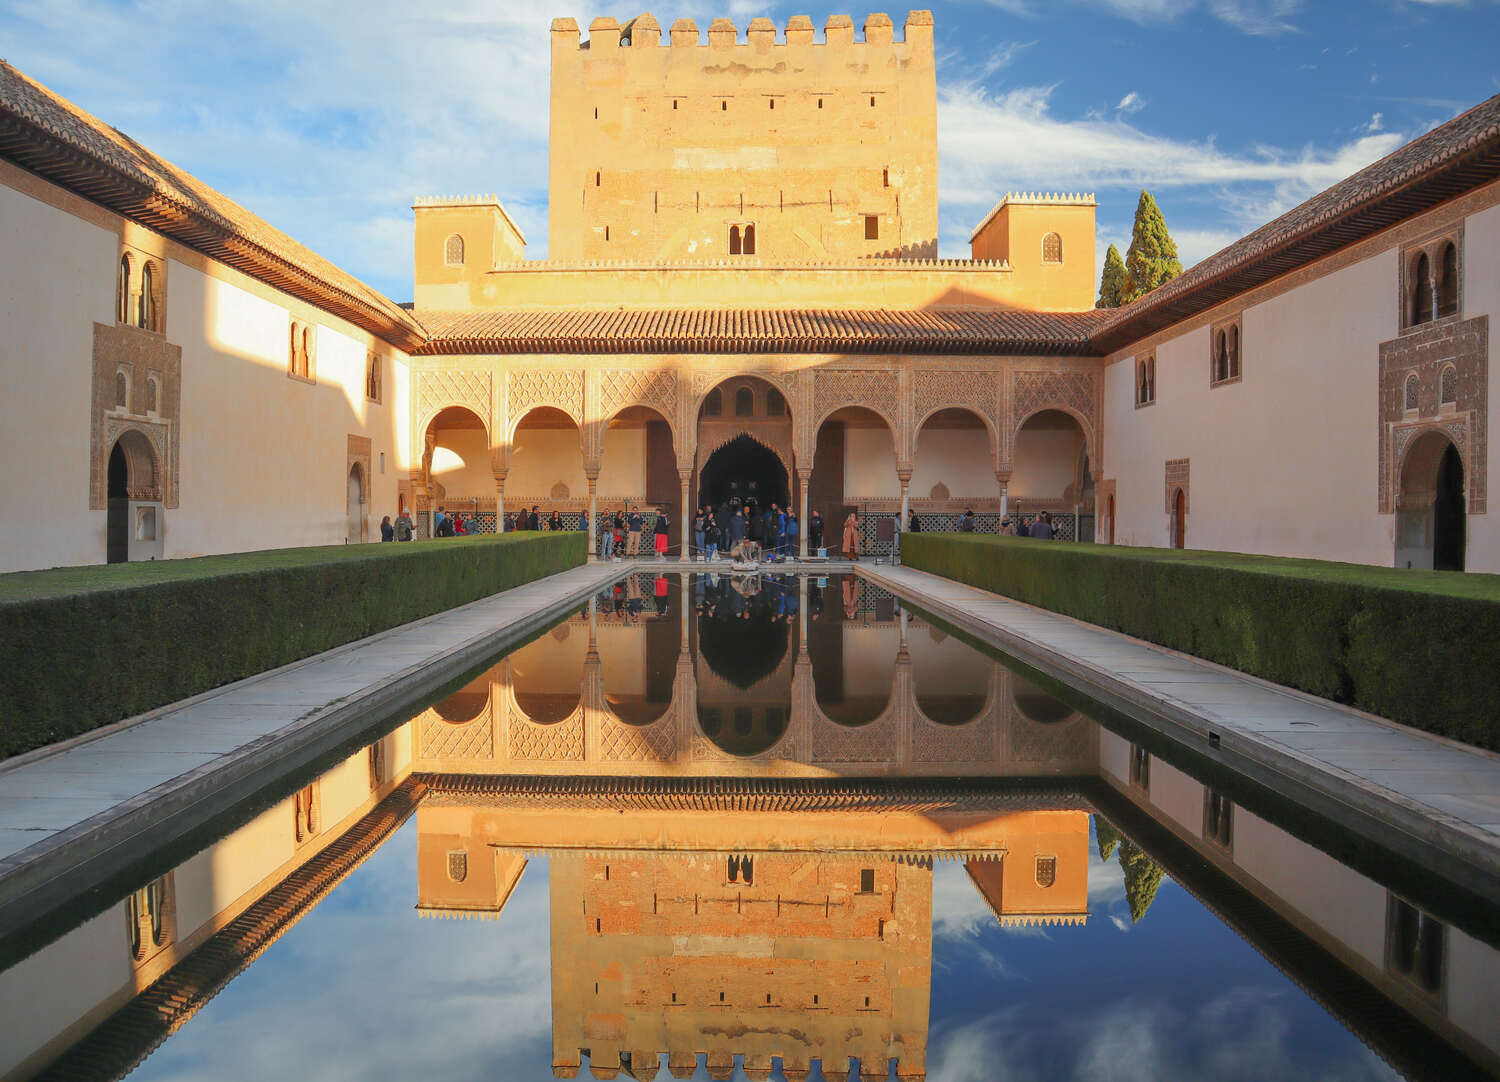 The Alhambra's Court of the Myrtles with its reflective pool under a clear sky in Granada, Spain.